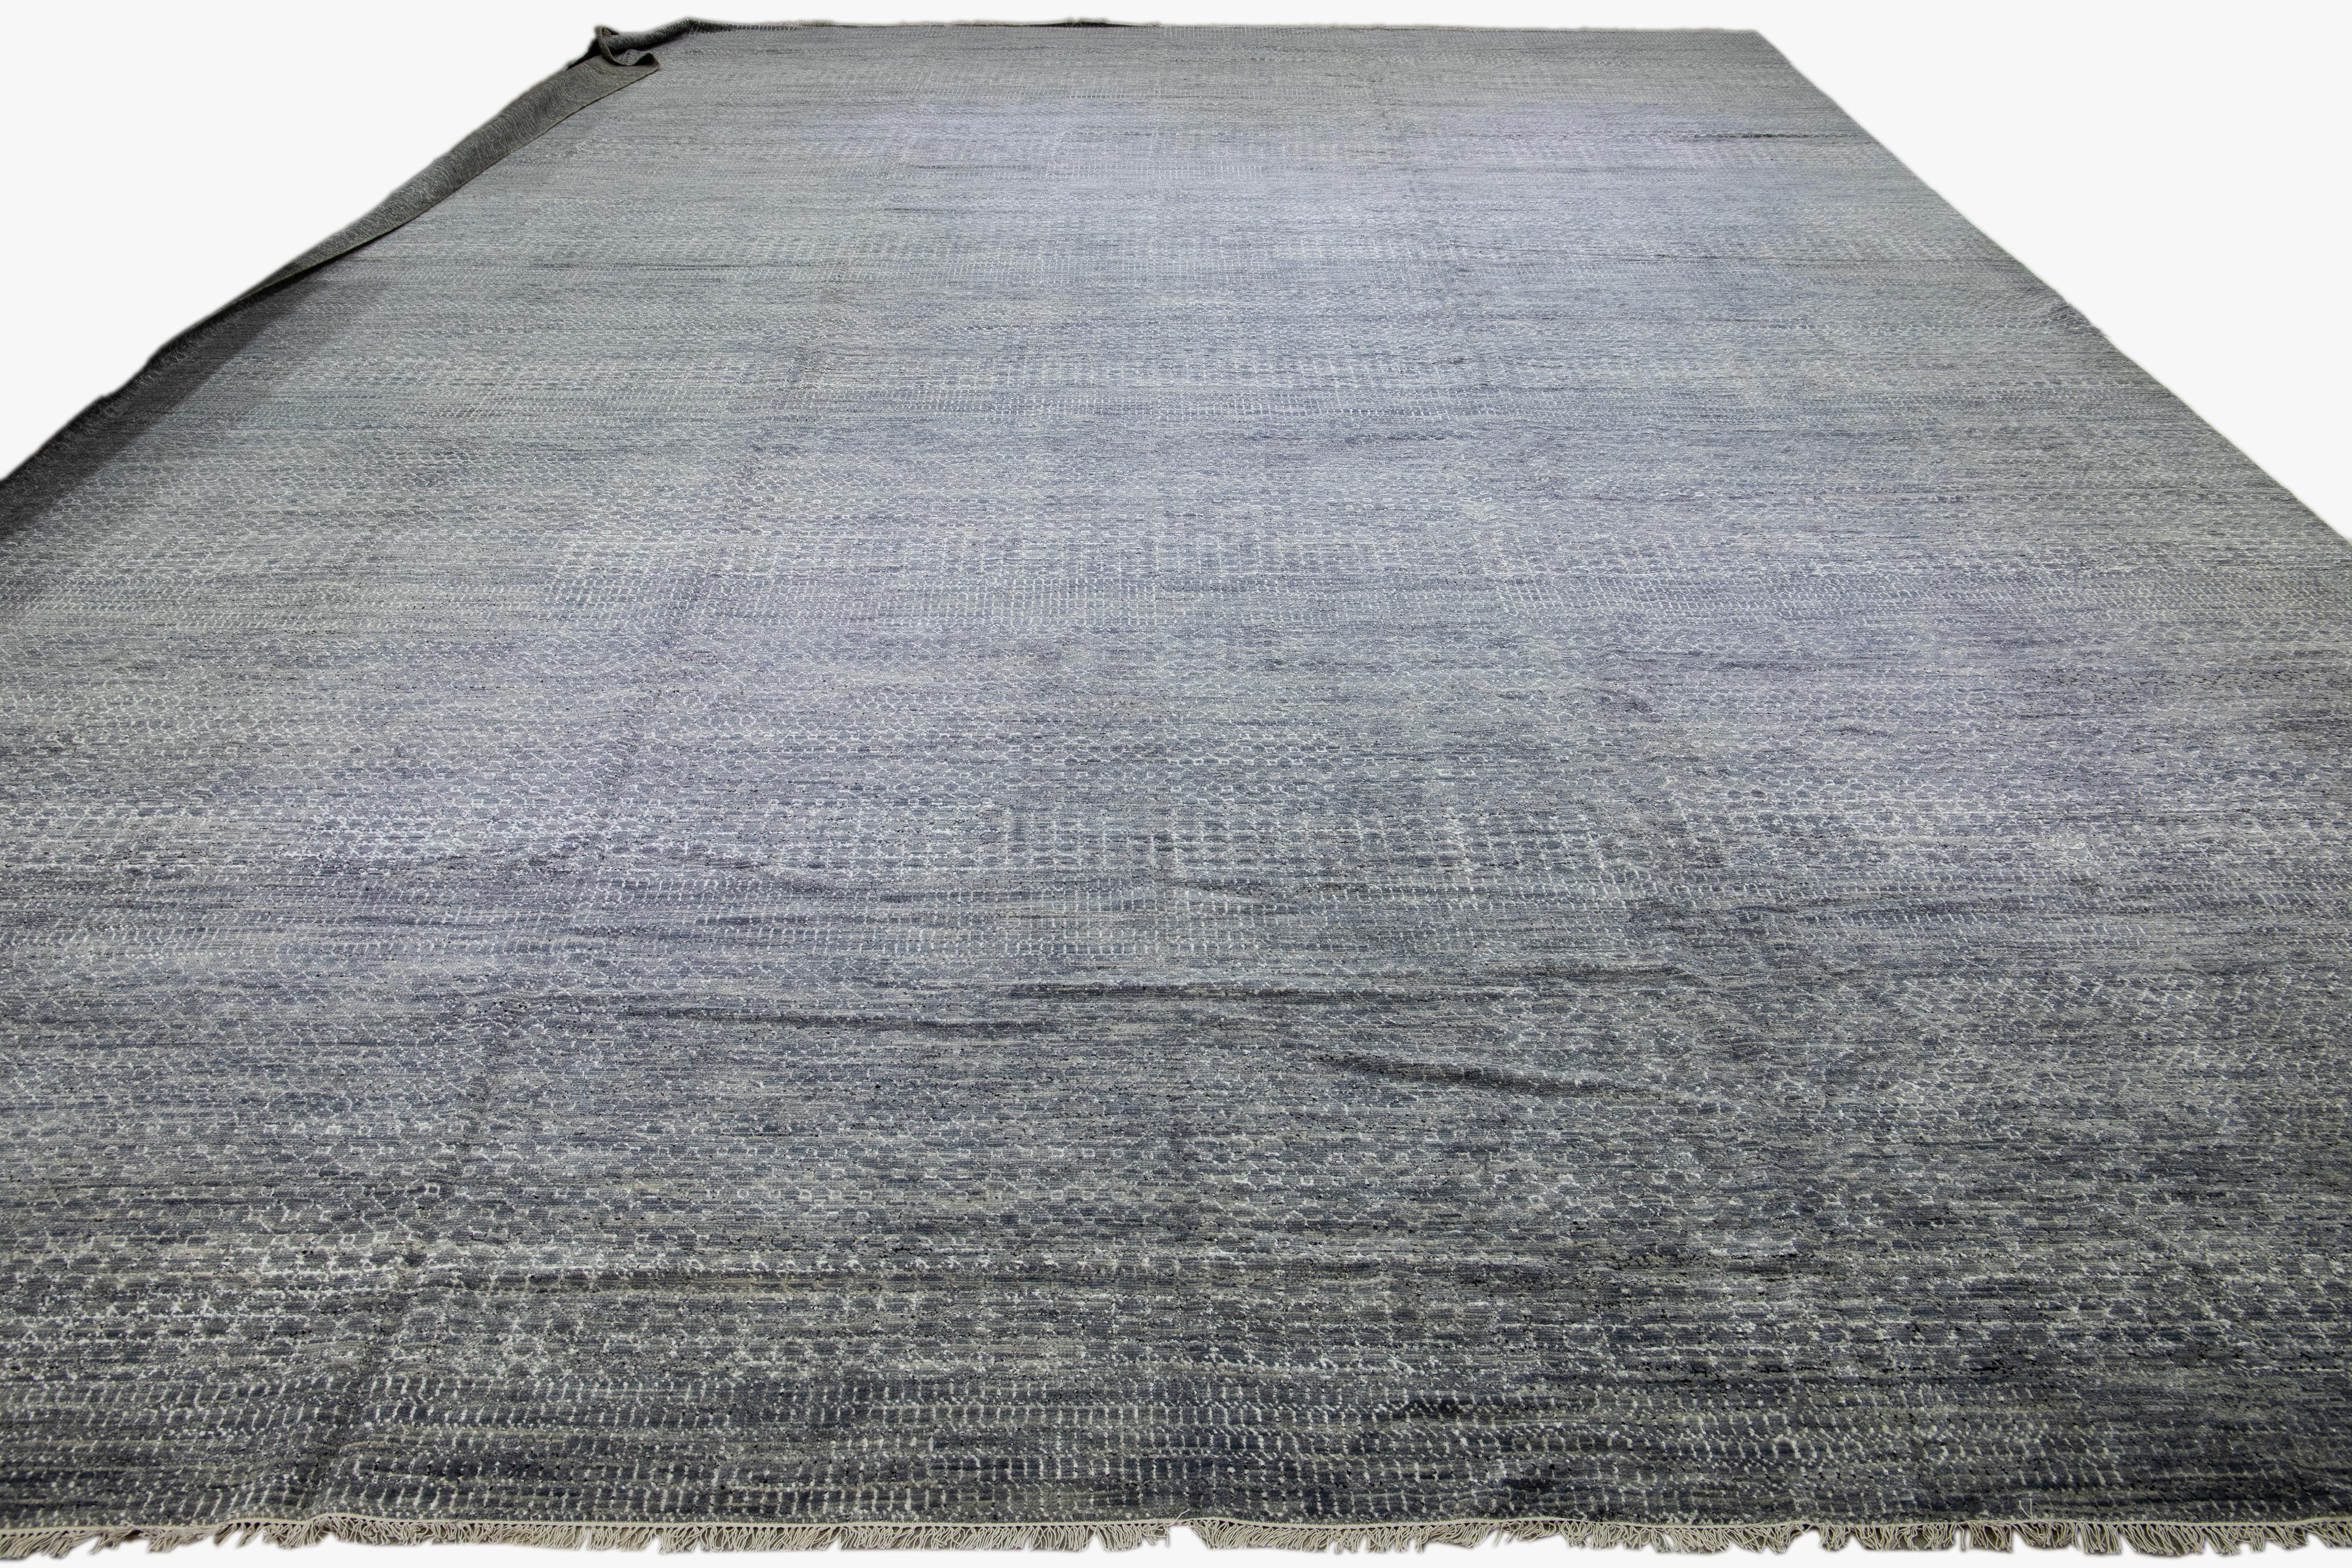 This elegant Shiva collection oversize hand-knotted wool rug features a stunning contemporary design, showcasing a meticulously crafted gray field with intricate ivory and black geometric patterns.

This rug measures 20'1